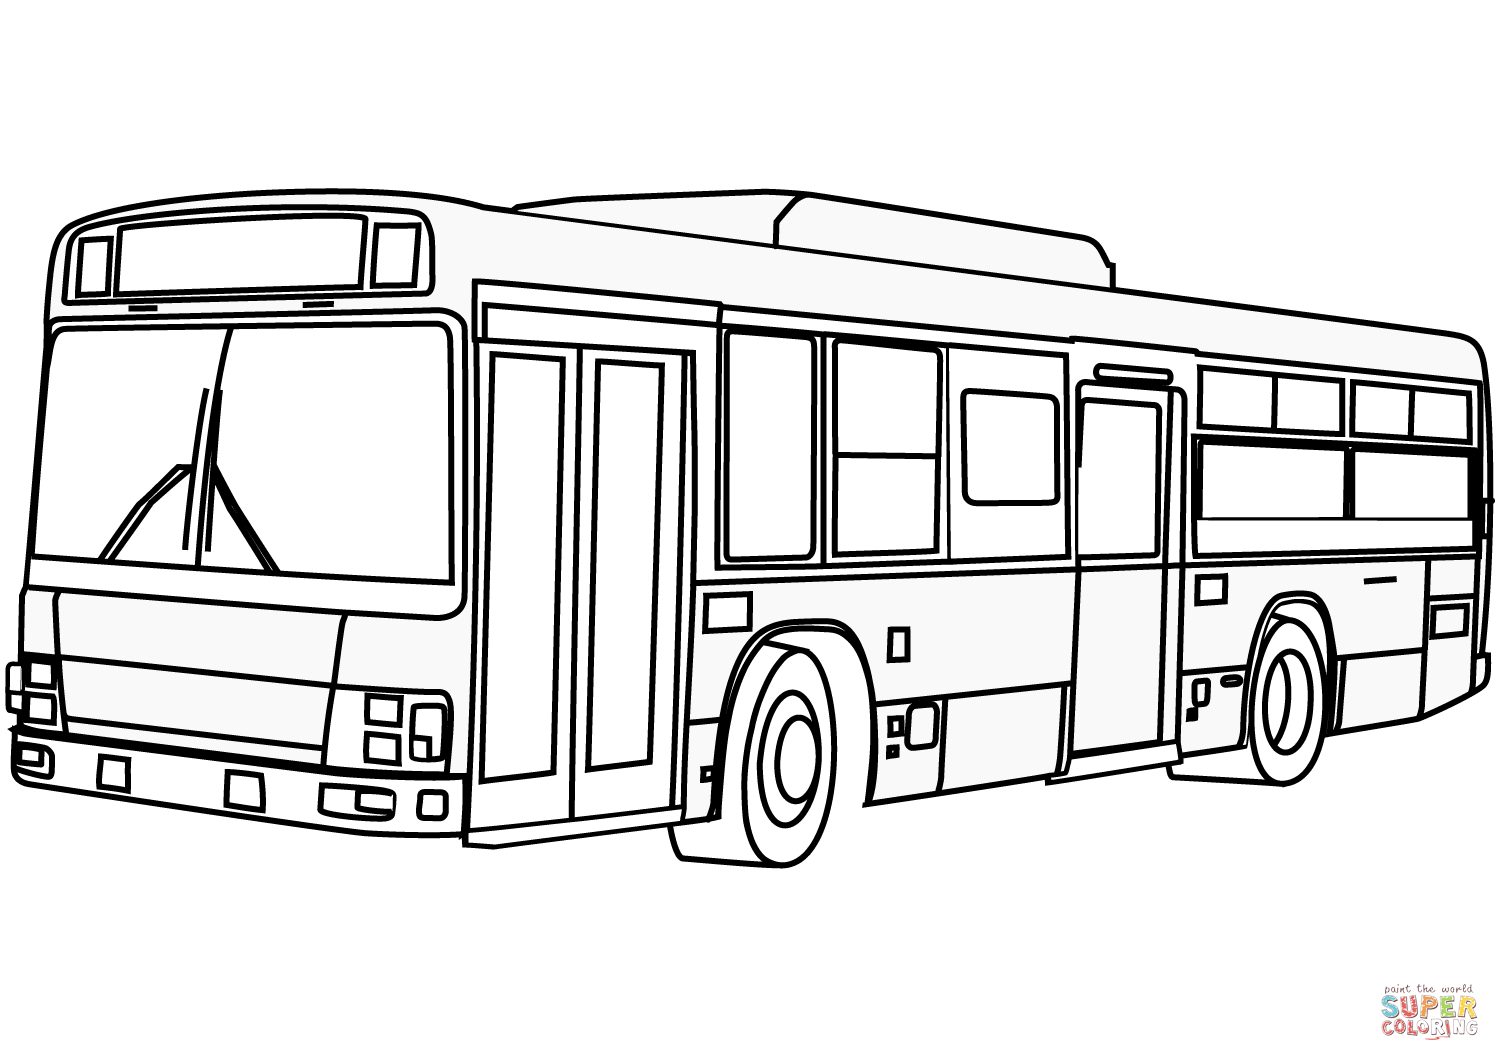 Bus coloring page free printable coloring pages